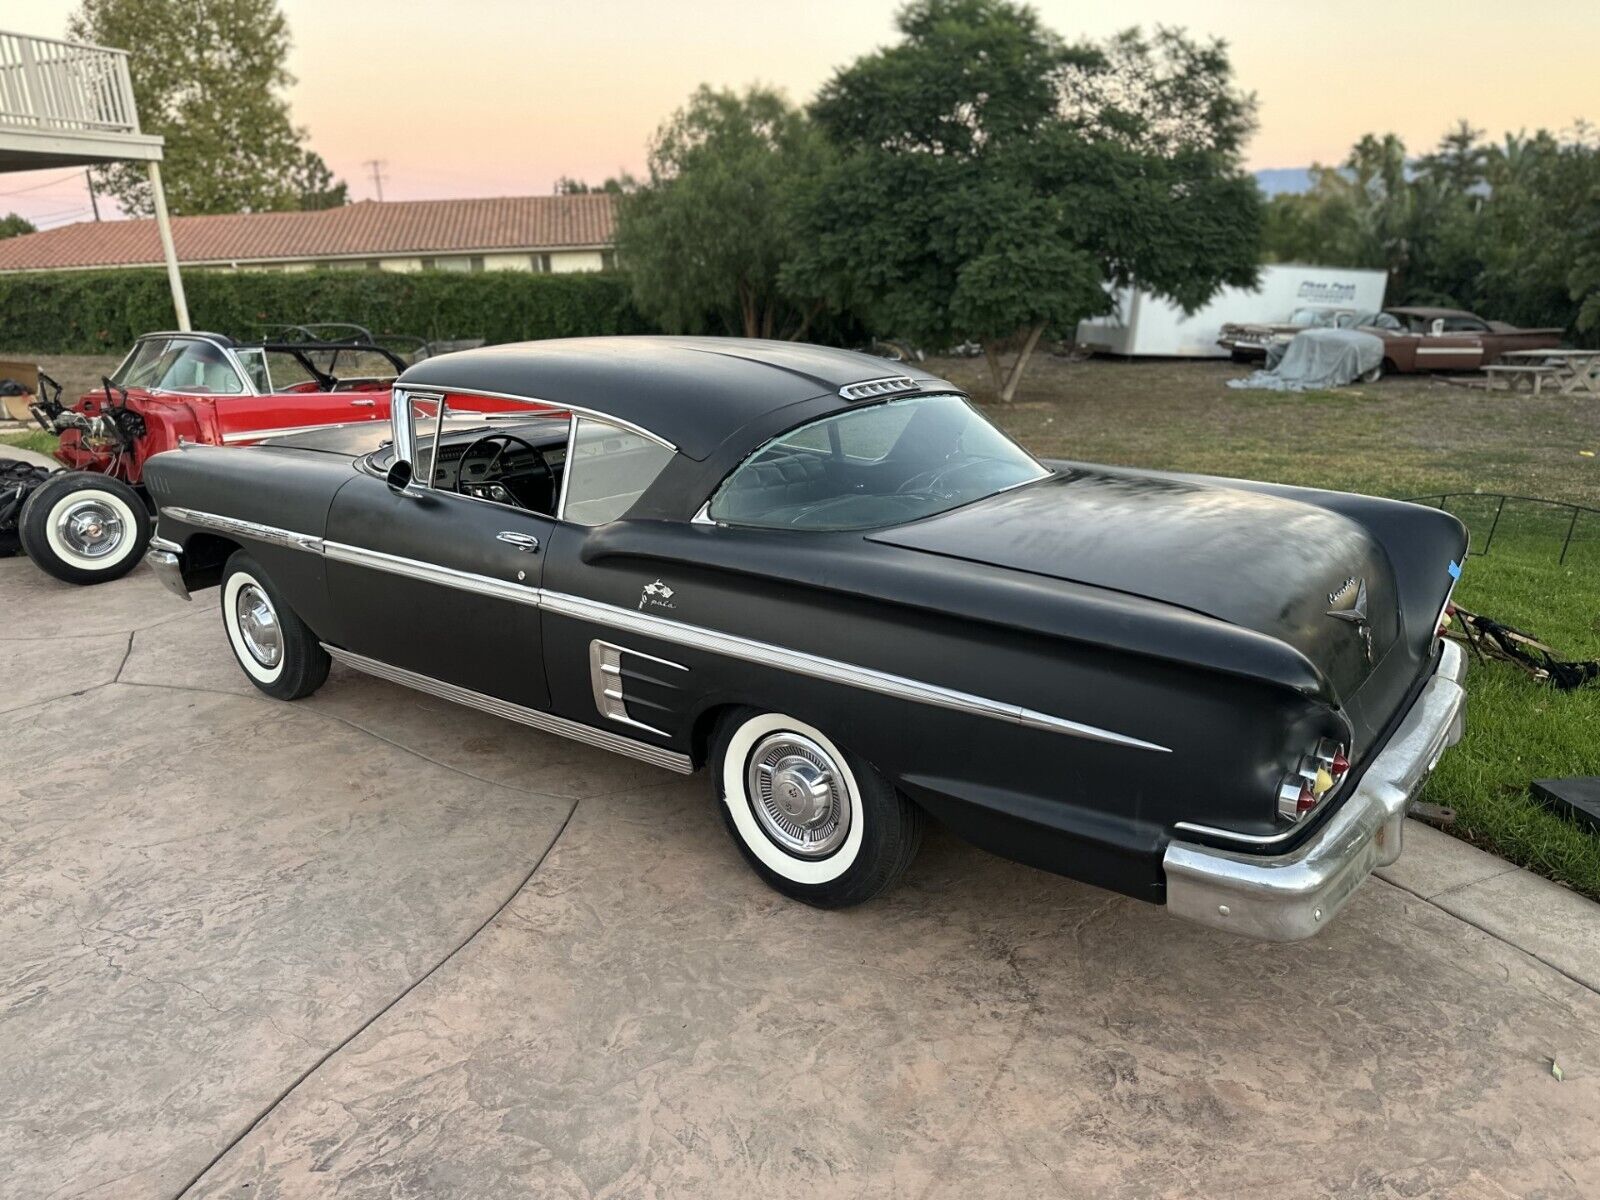 Saved 1958 Chevrolet Impala Is Complete and Ready for the Road (If You ...